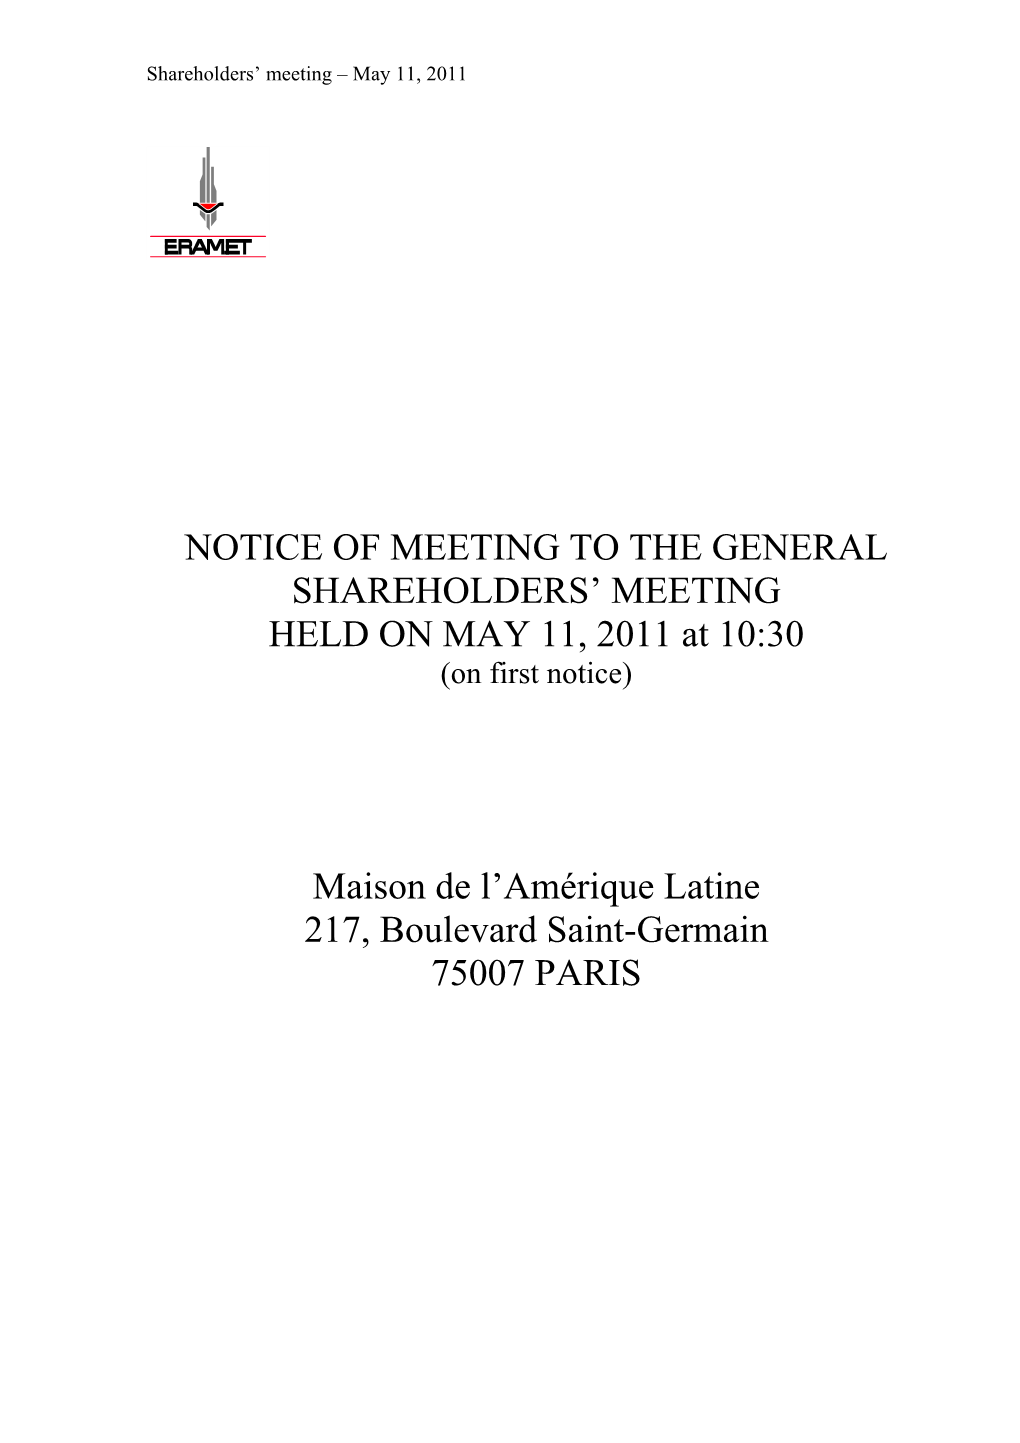 NOTICE of MEETING to the GENERAL SHAREHOLDERS’ MEETING HELD on MAY 11, 2011 at 10:30 (On First Notice)